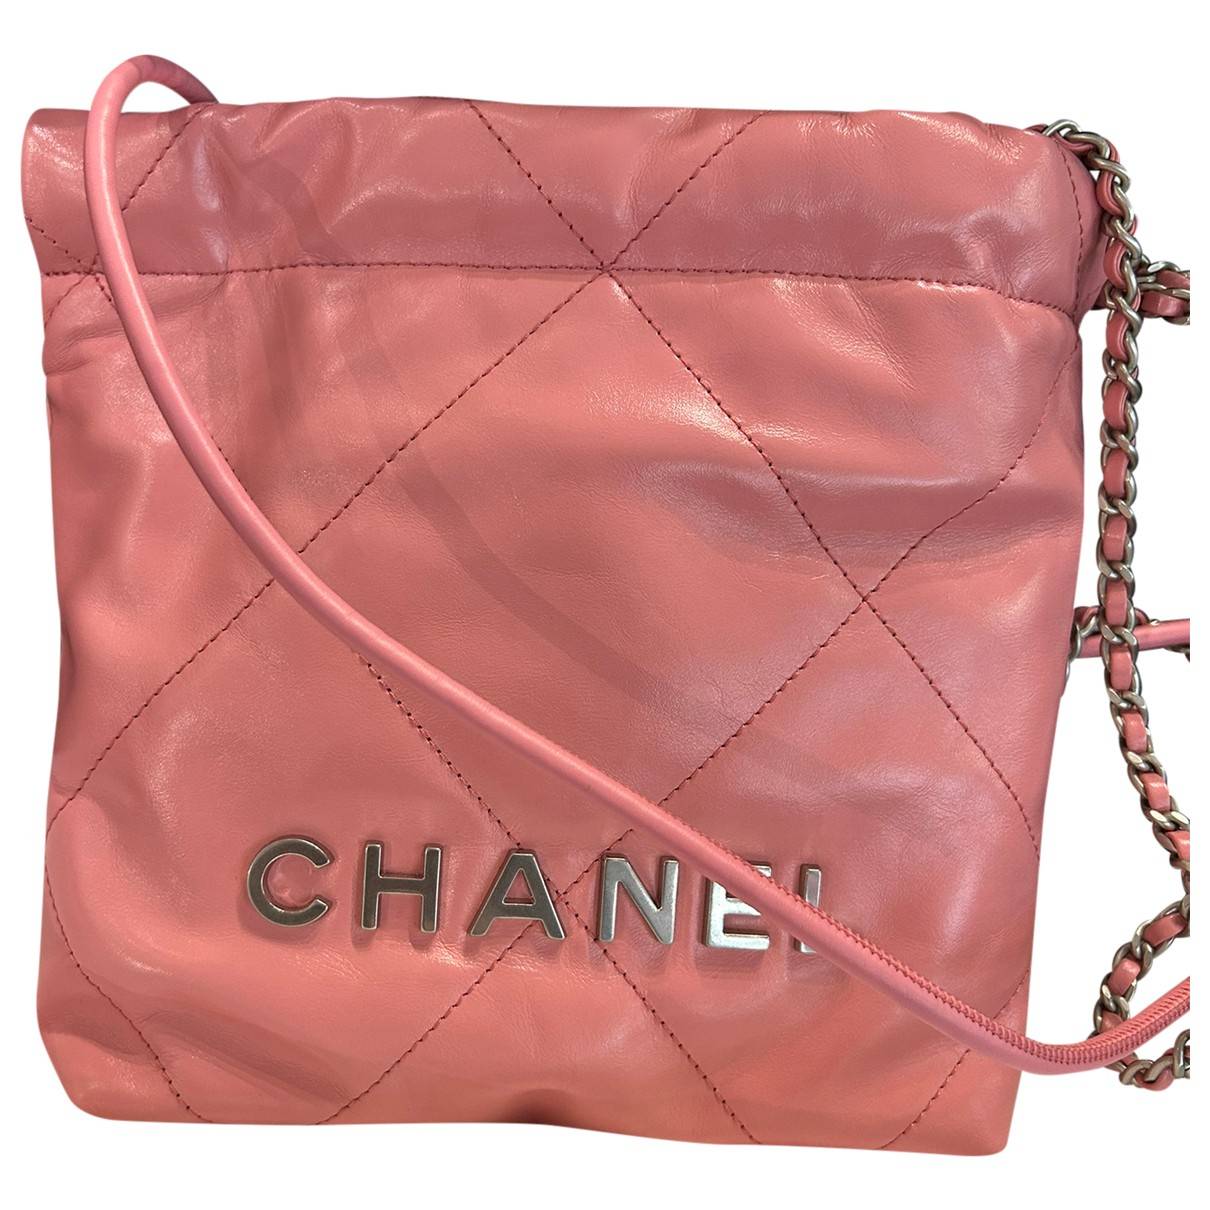 Chanel - Authenticated Chanel 22 Handbag - Leather Pink for Women, Never Worn